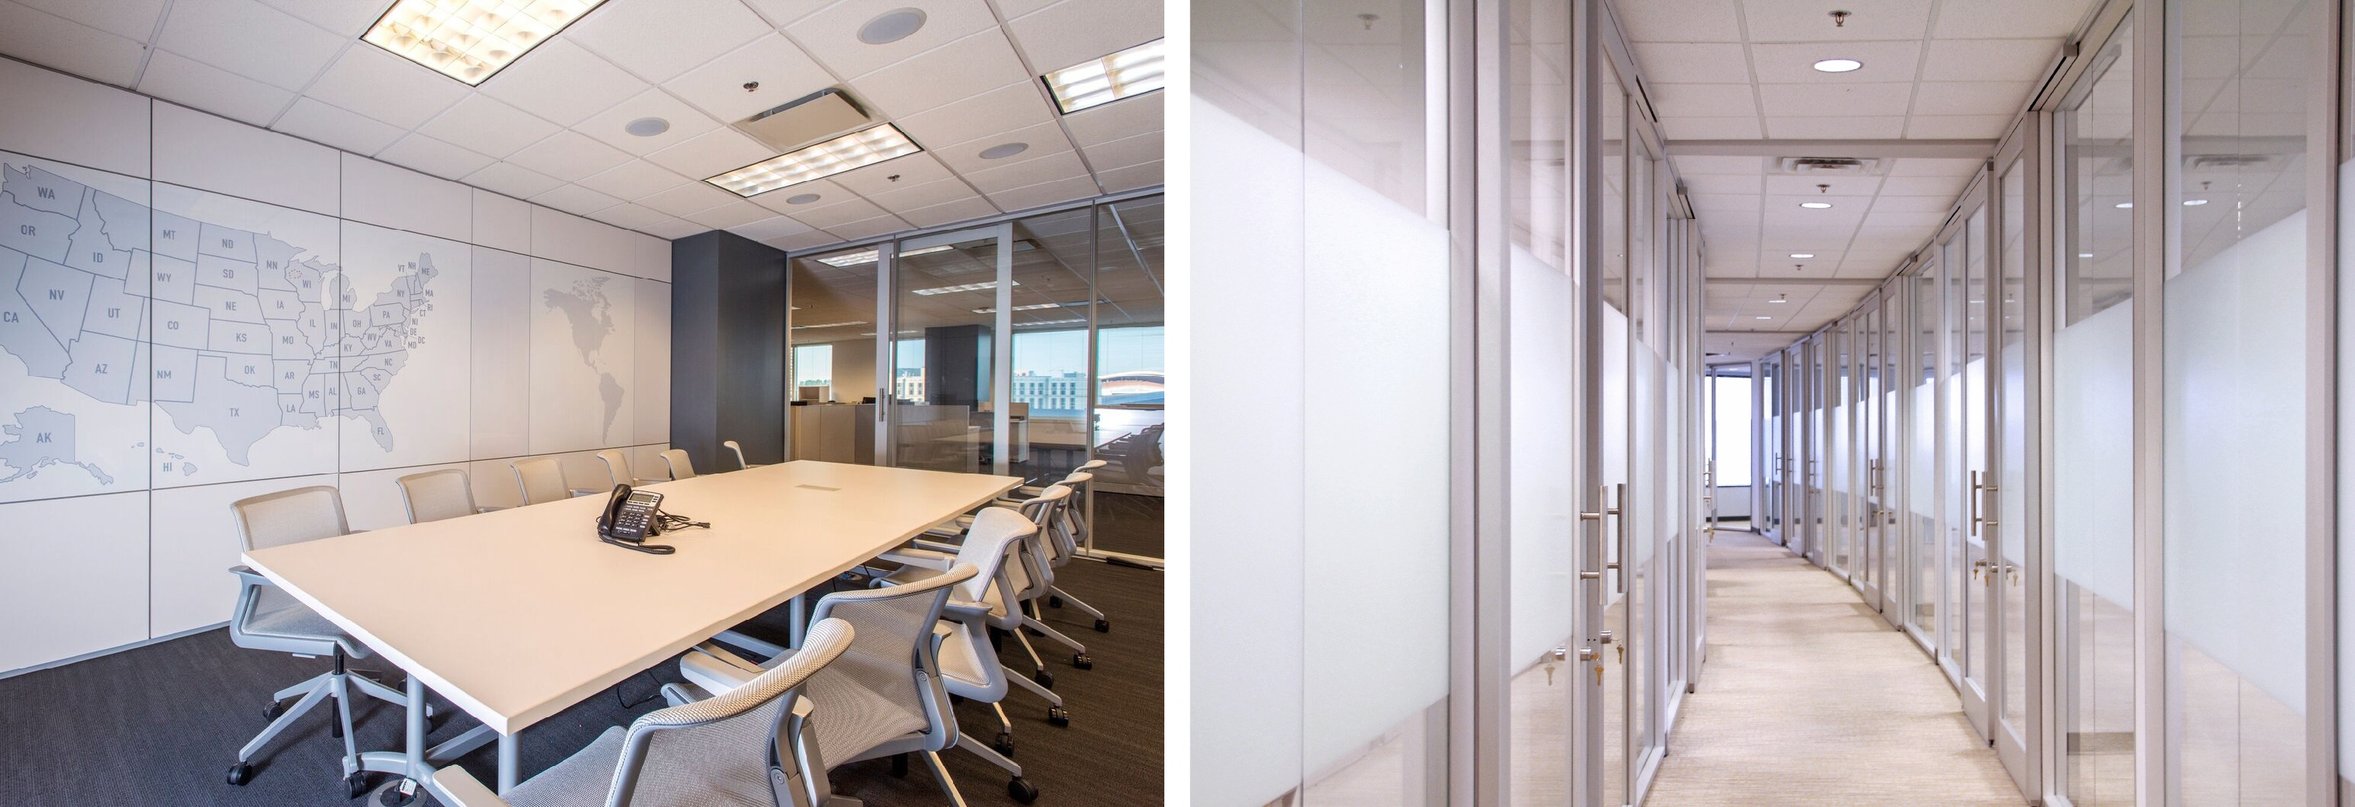 Glass office walls in brightly lit office